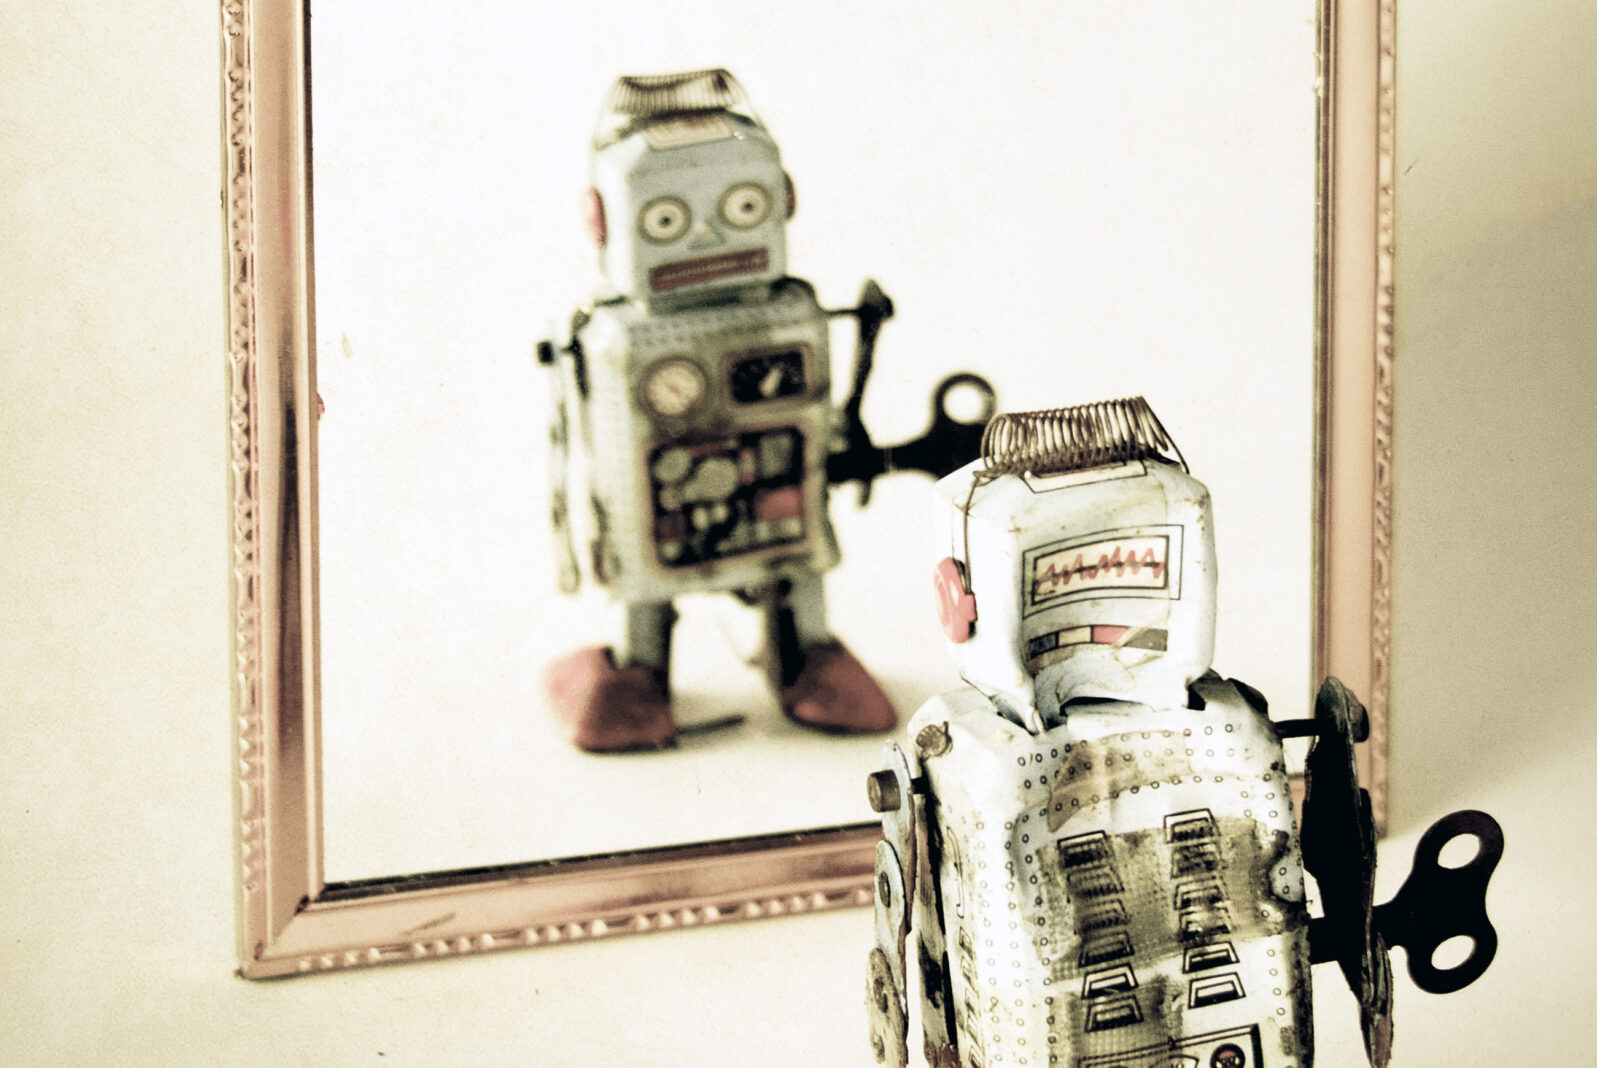 Toy Robot looking at itself in mirror